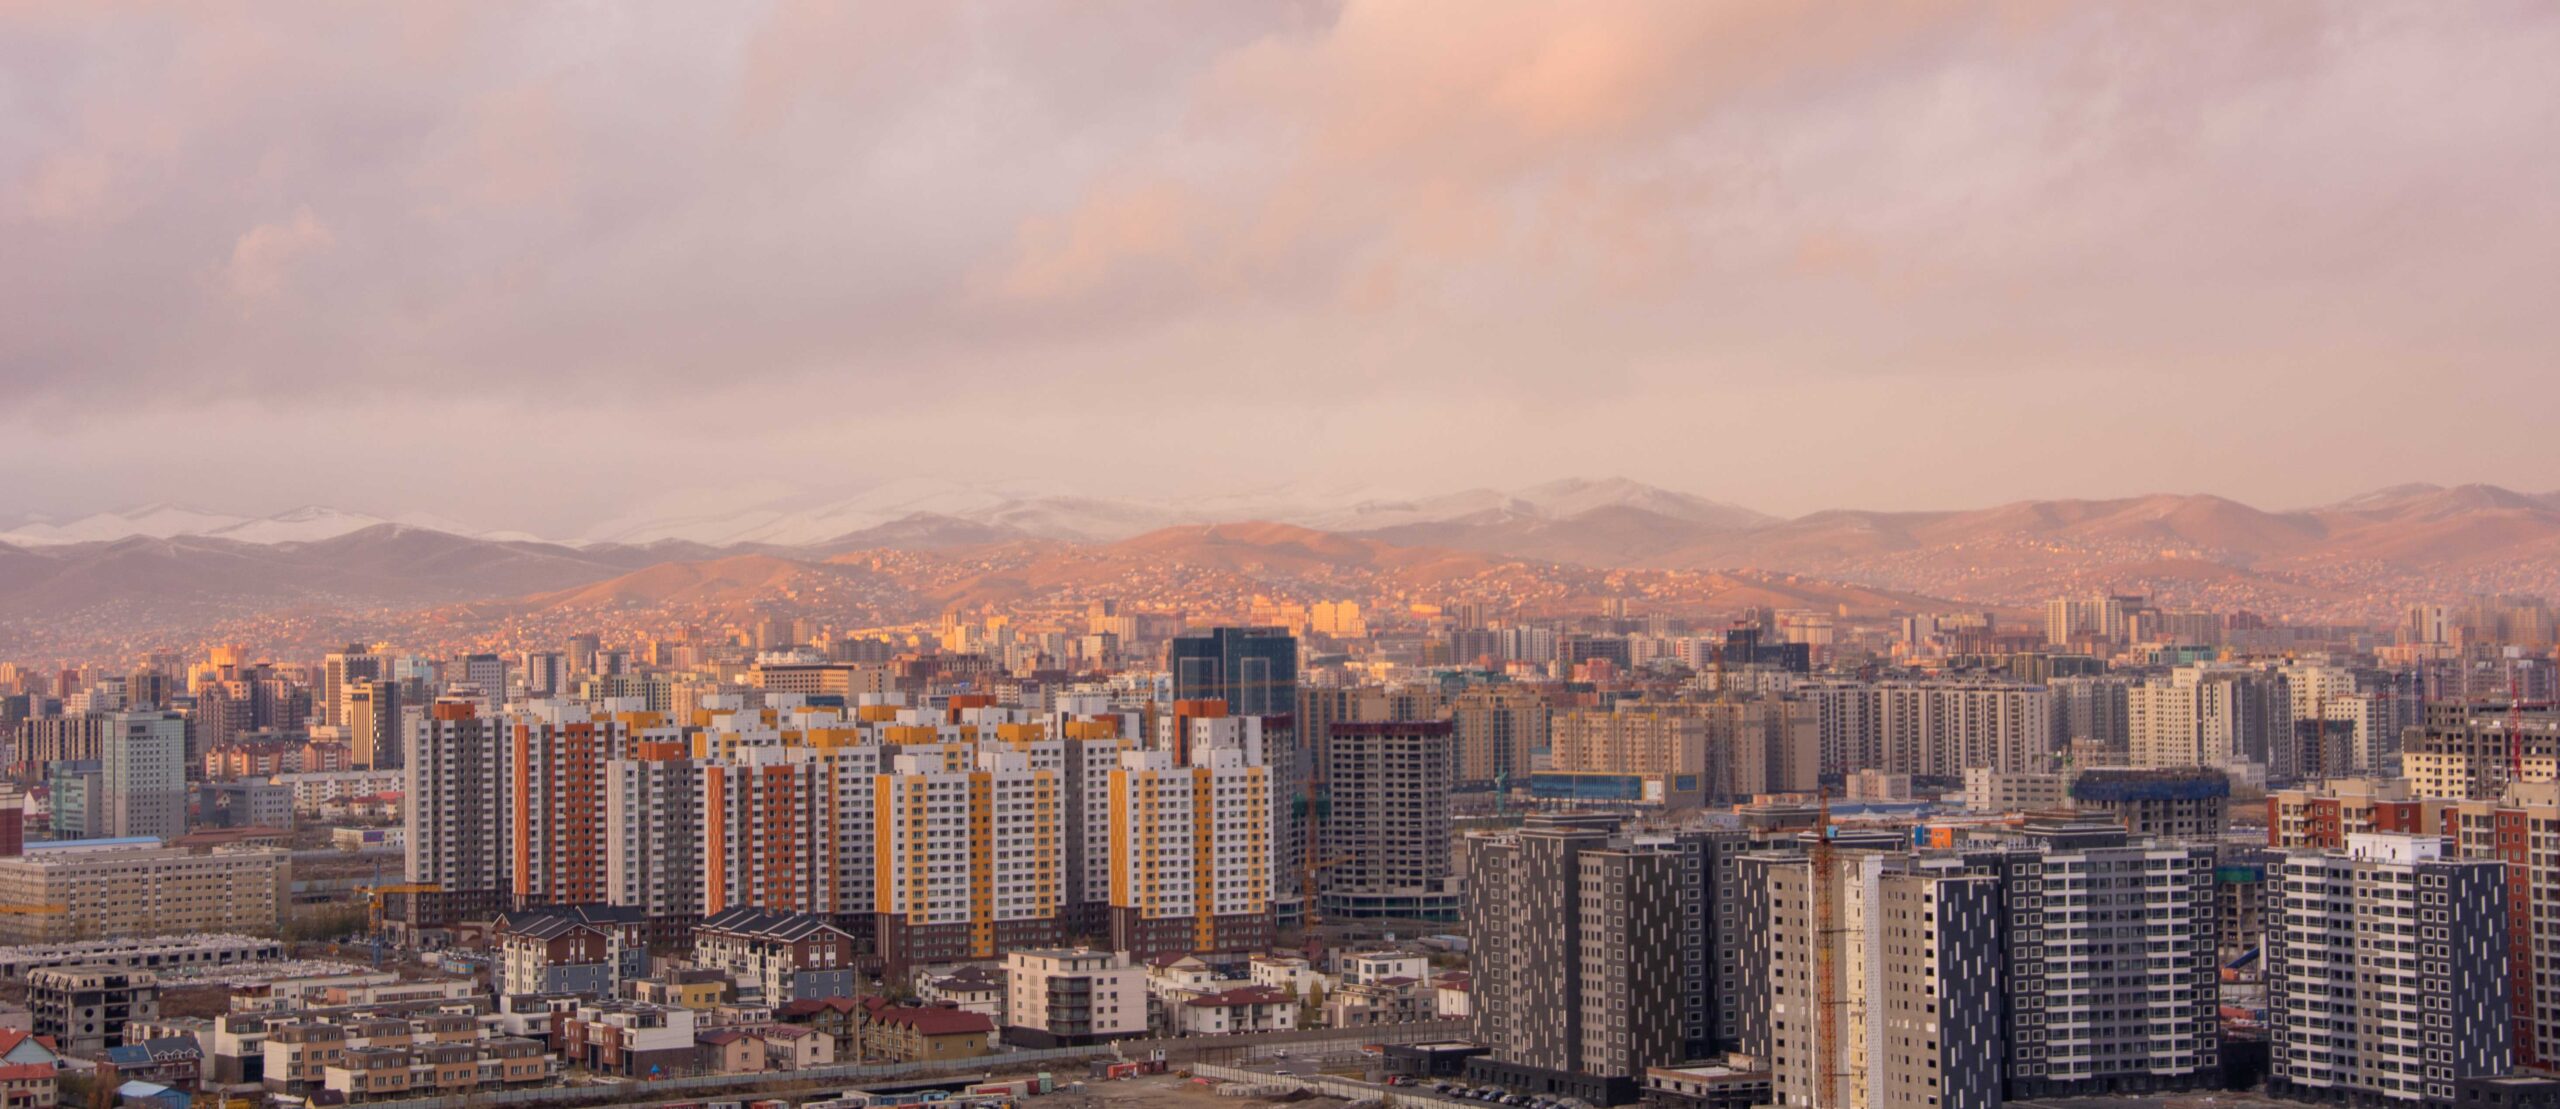 The 5 biggest cities in Mongolia